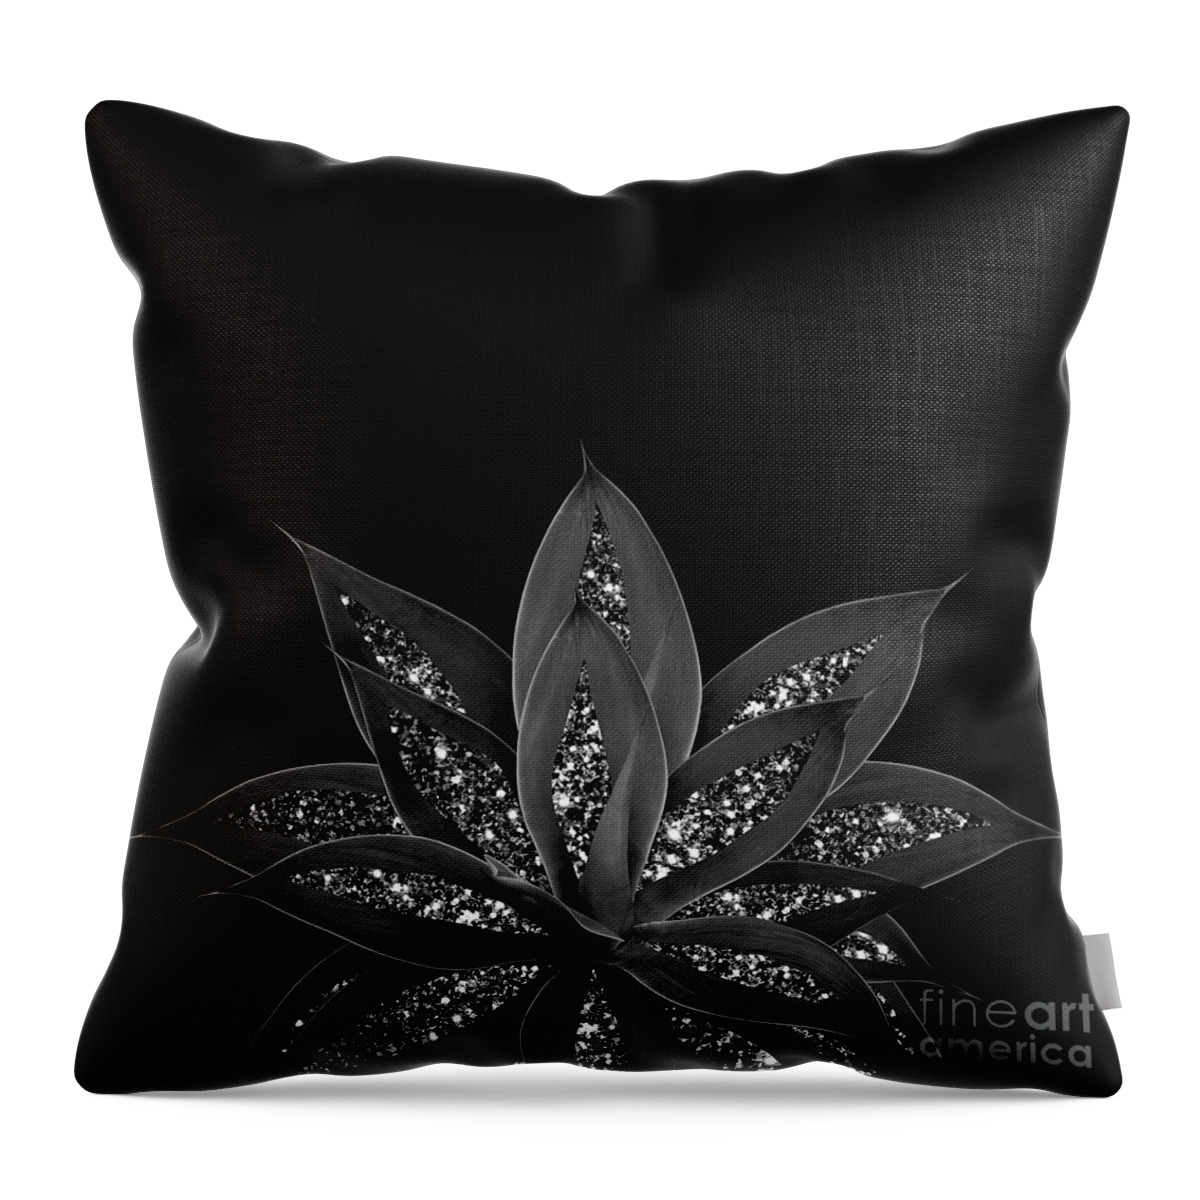 Photography Throw Pillow featuring the mixed media Gray Black Agave with Black Silver Glitter #2 #shiny #tropical #decor #art by Anitas Bella Jantz